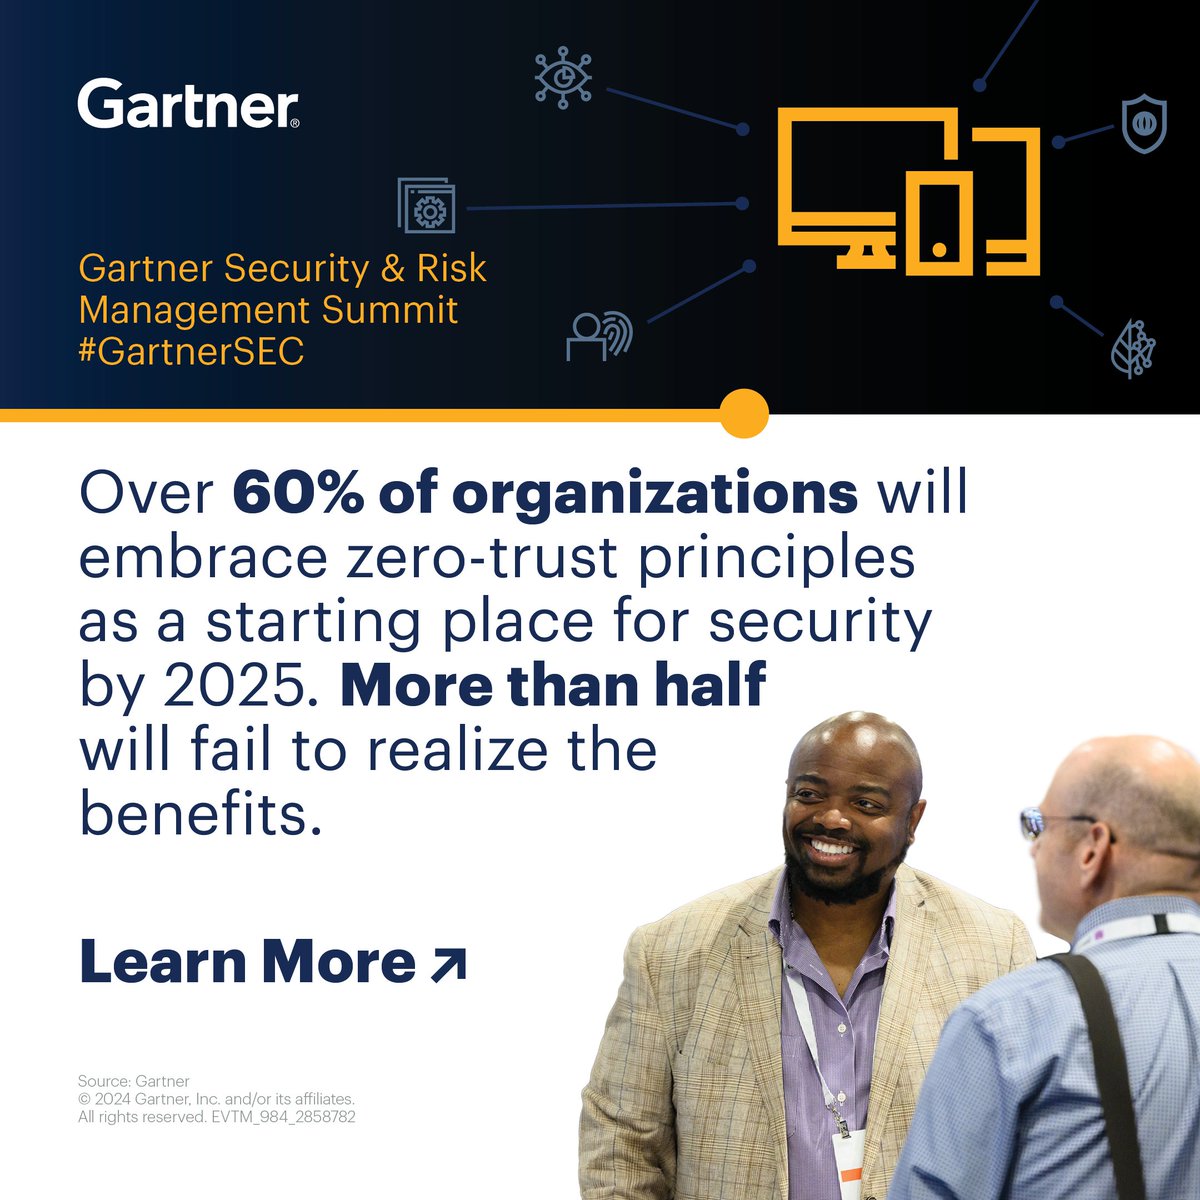 Today’s complex data environment requires greater granularity and multiple factors in access control decisions – beyond just identity. 

Improve your security and risk posture with zero trust architecture: gtnr.it/3TQKffP 

#GartnerSEC #Cybersecurity #ZeroTrust